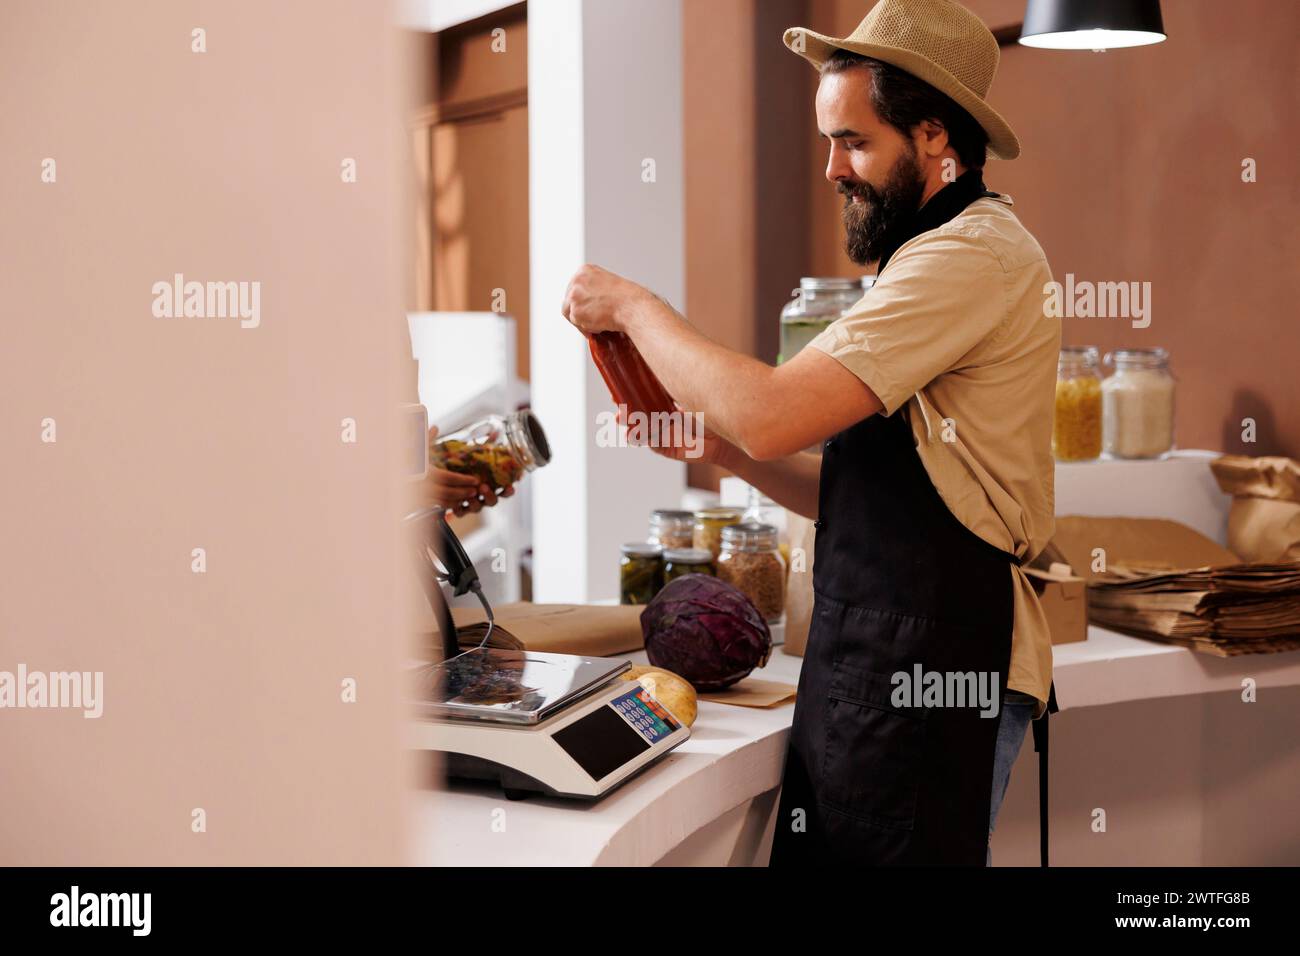 Caucasian male shopkeeper, who wears a stylish hat and black apron, stands behind the checkout counter holding a jar filled with pasta sauce. Vendor analyzing glass container at cashier desk. Stock Photo